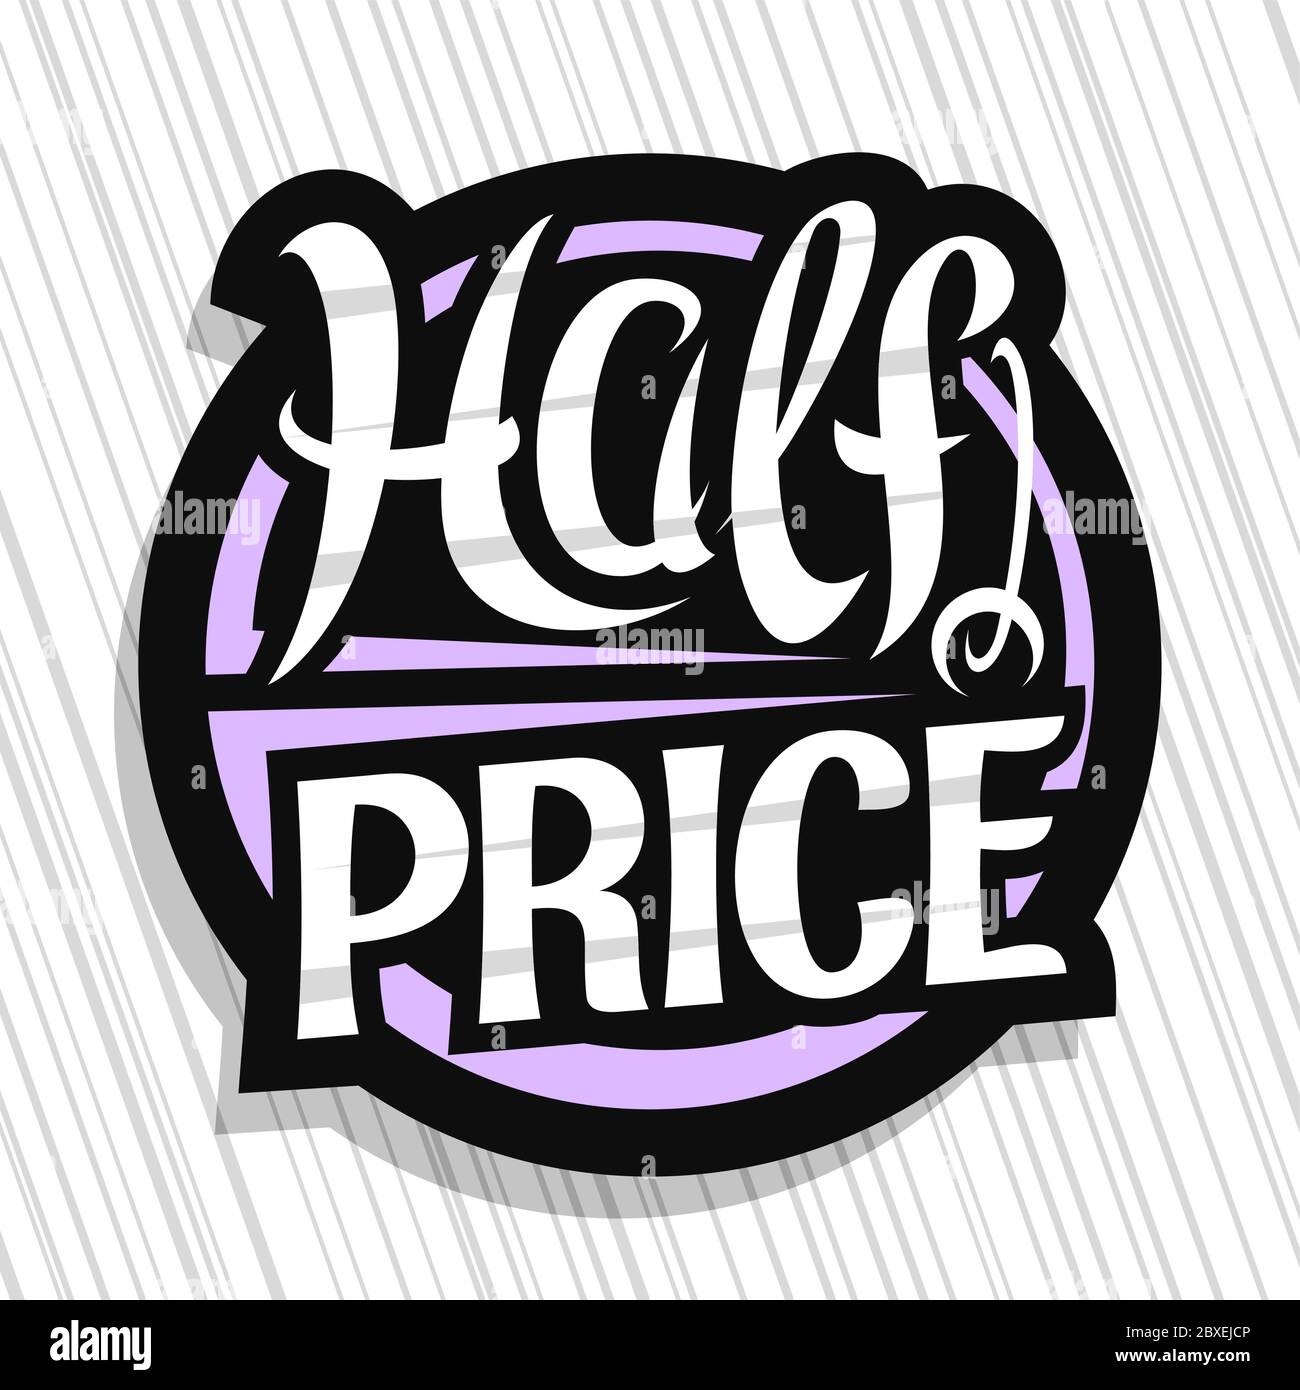 Vector logo for Half Price Sale, dark decorative price tag for black friday or cyber monday sale with unique handwritten lettering for words half pric Stock Vector